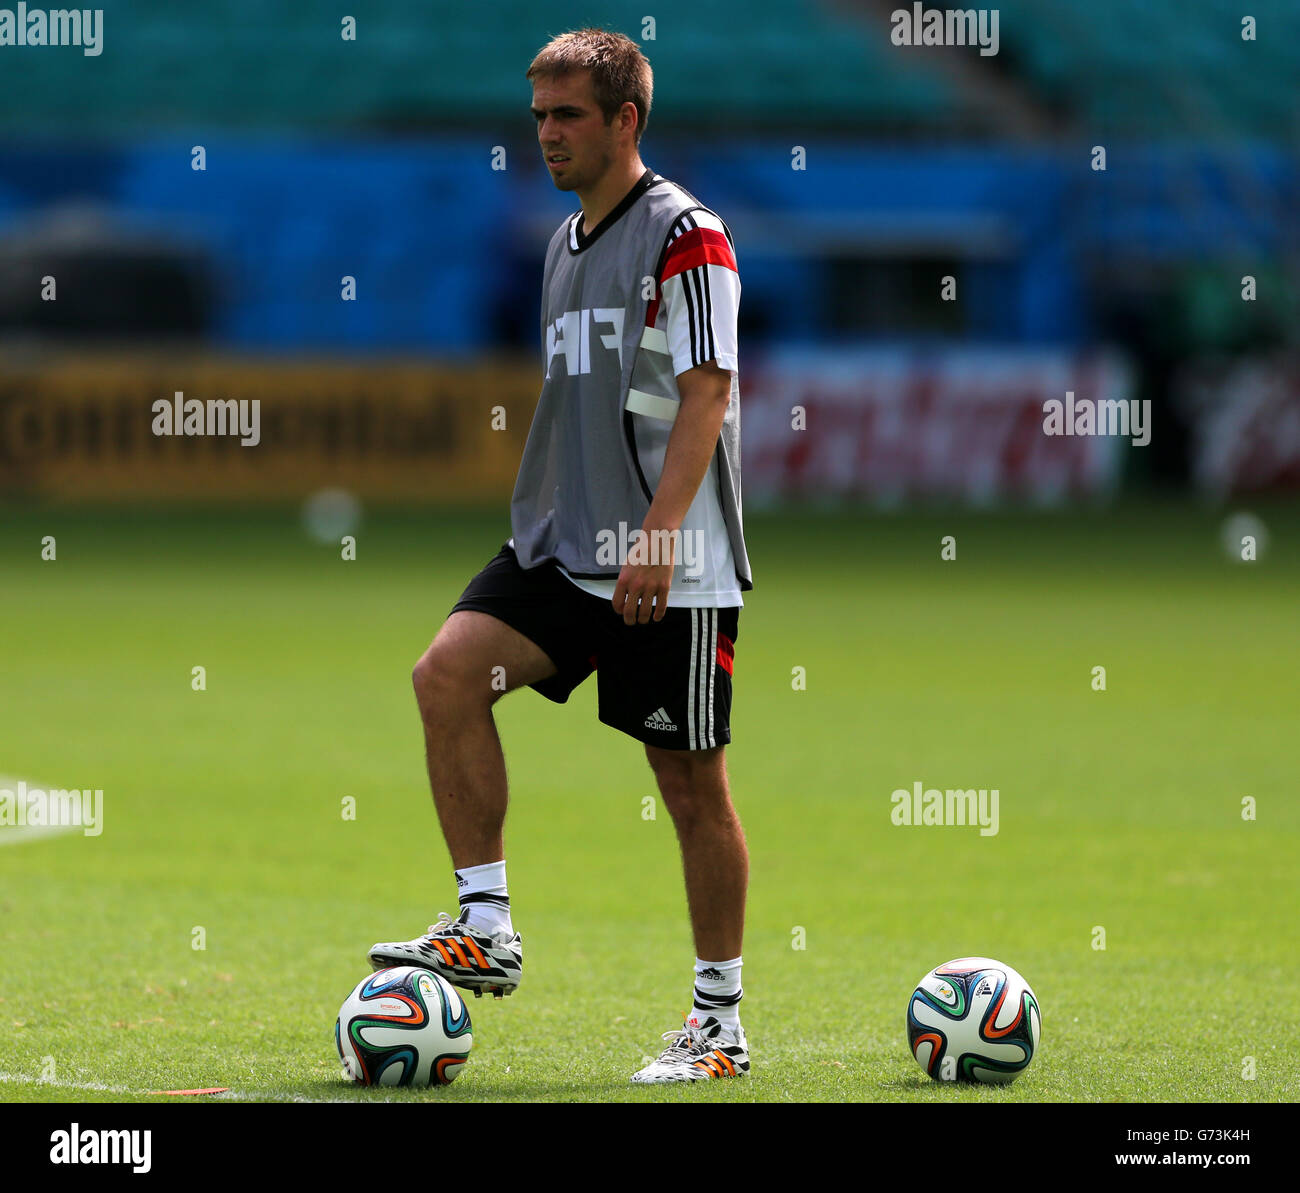 Soccer - FIFA World Cup 2014 - Group G - Germany v Portugal - Germany Training Session - Arena Fonte Nova. Germany's Philipp Lahm Stock Photo